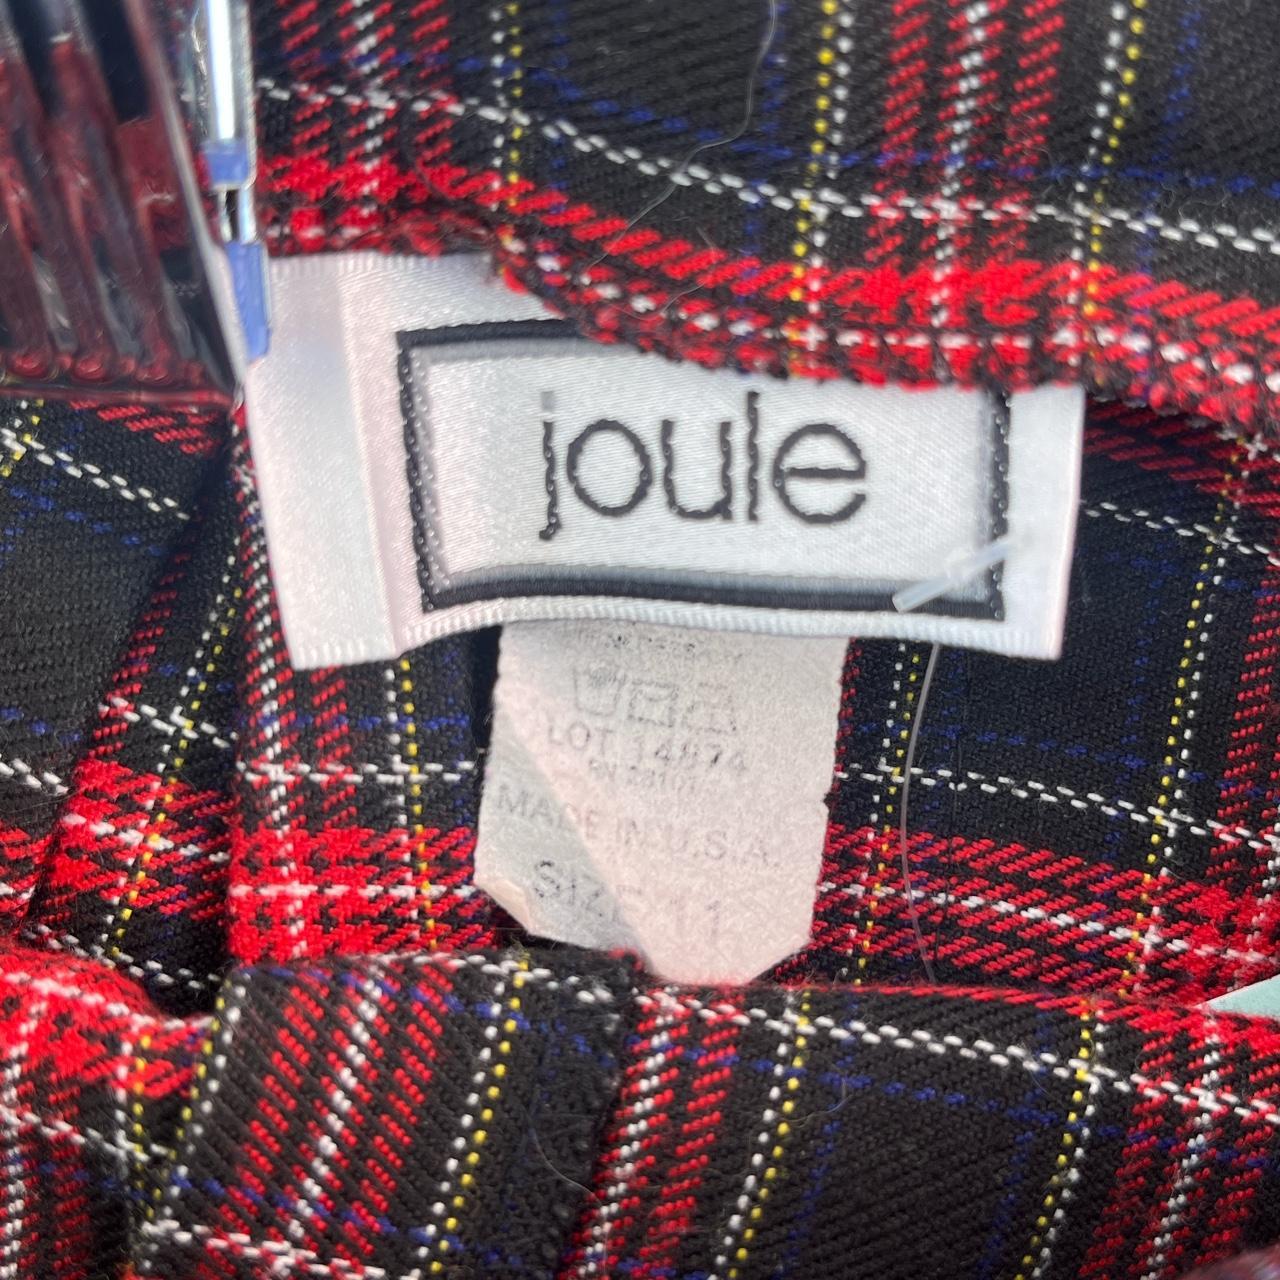 Joules Women's Red and Black Skirt (4)